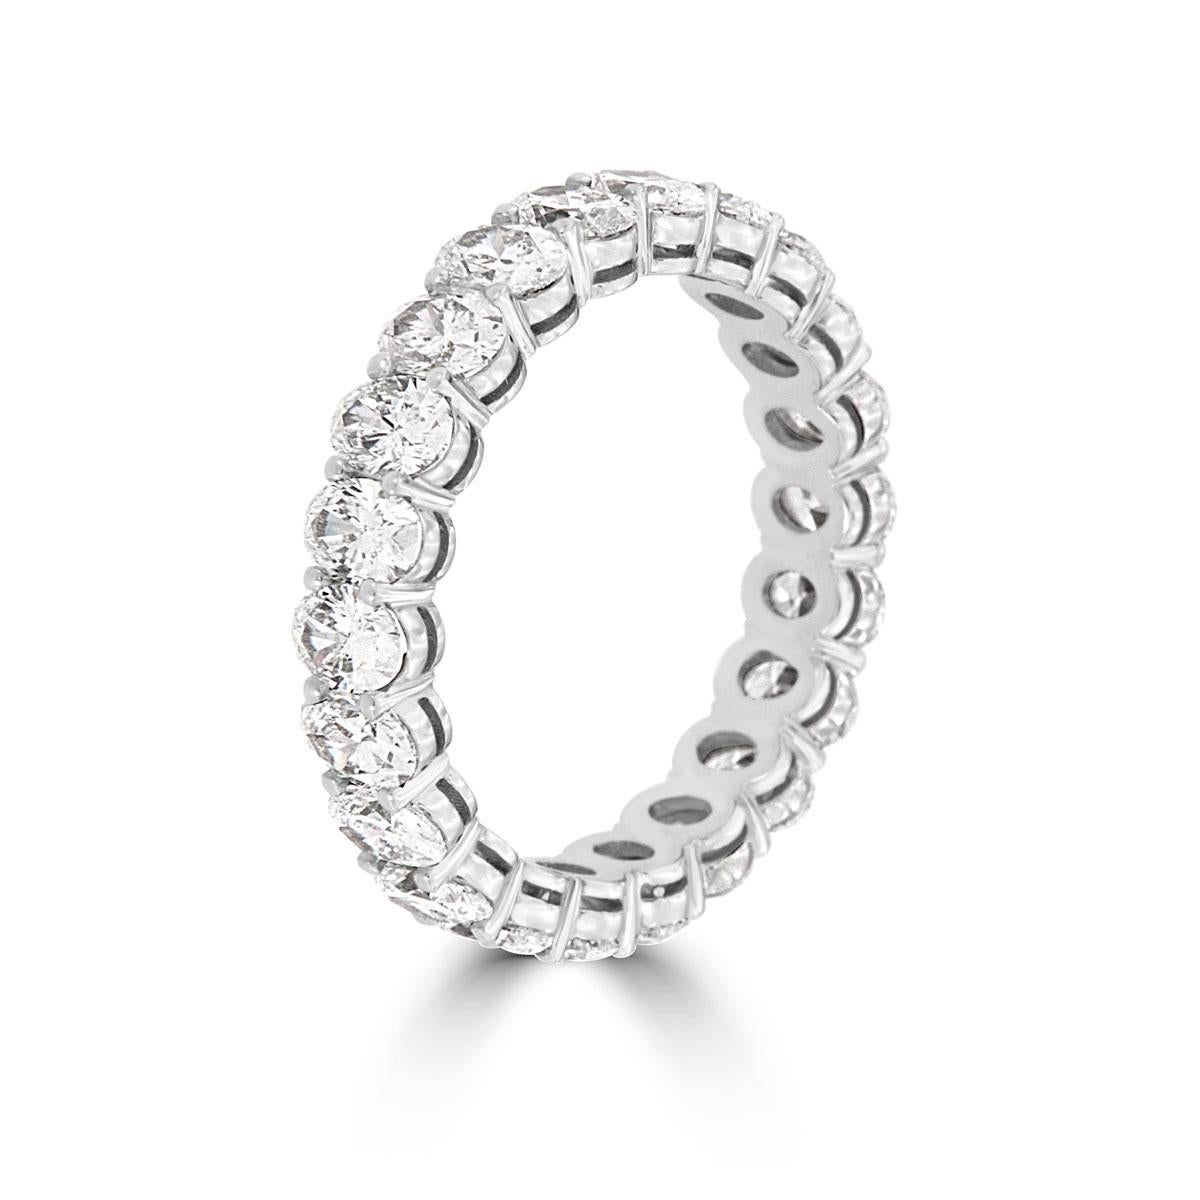 This Eternity Ring showcase perfectly matched 22 Oval shape Natural Diamonds in a total weight of 3.00 carat set in a shared prongs ring

Product details: 

Center Gemstone Color: WHITE
Side Gemstone Type: NATURAL DIAMOND
Side Gemstone Shape: